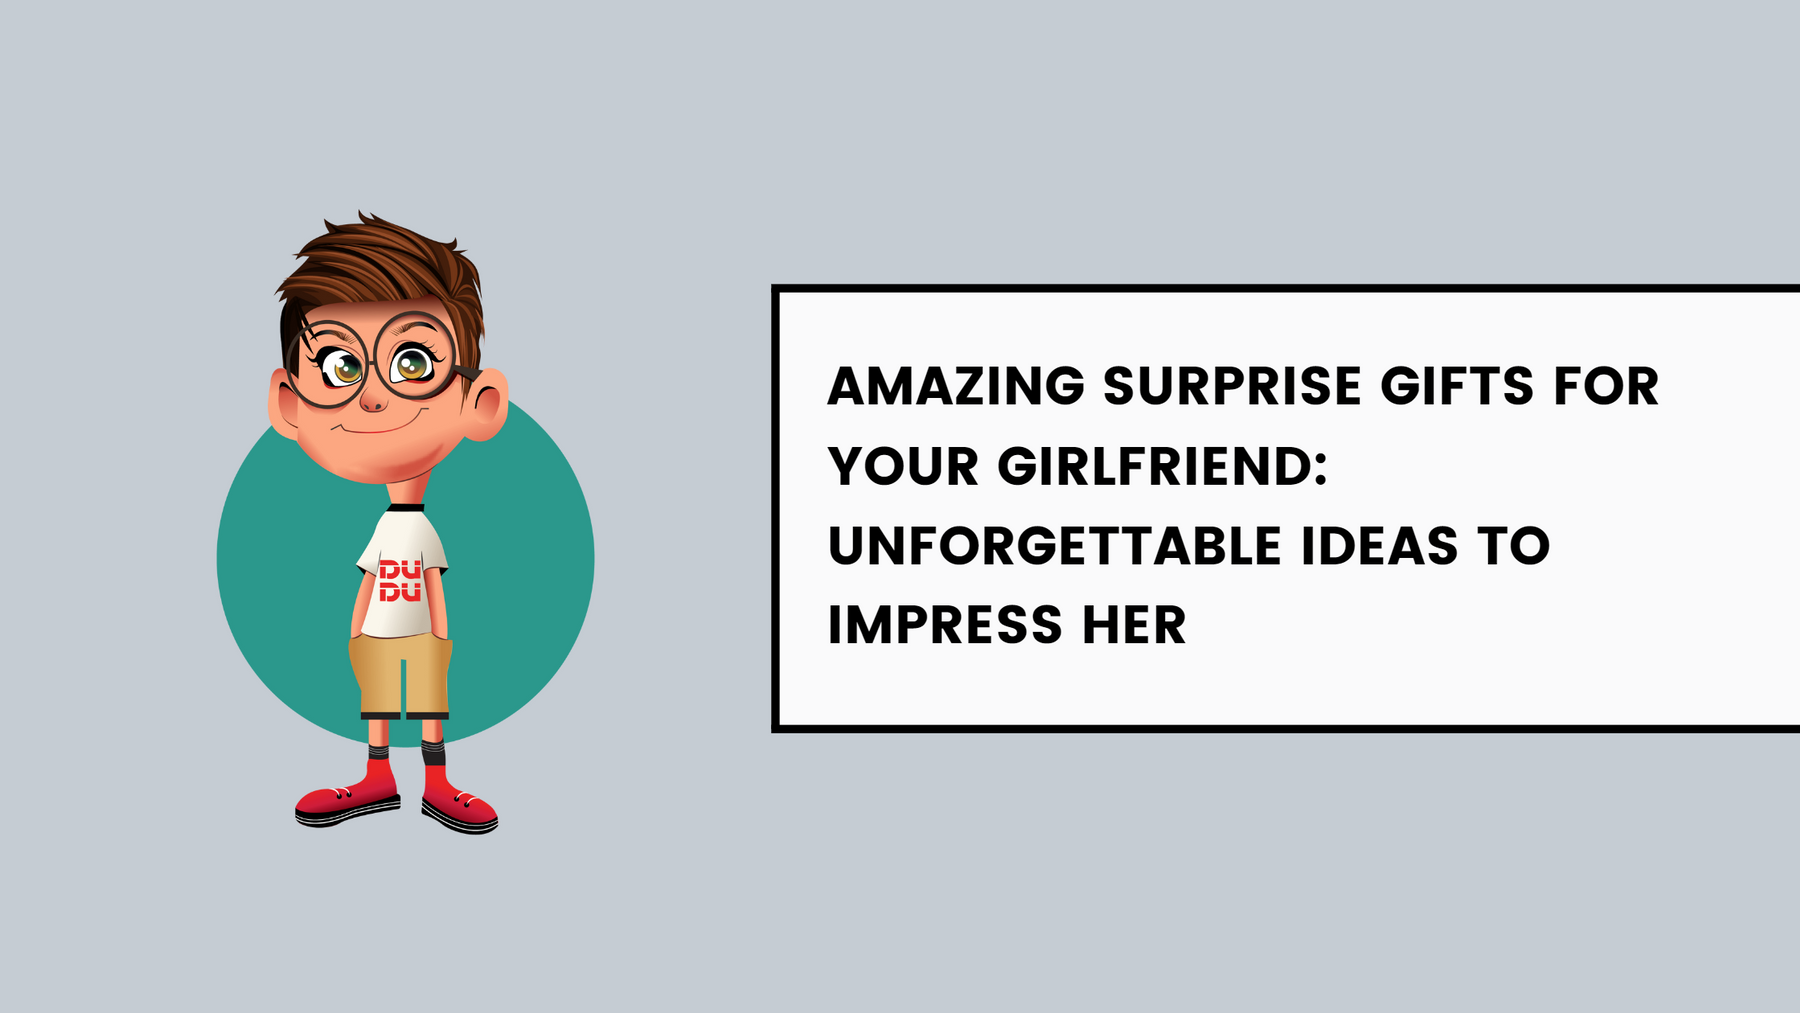 Amazing Surprise Gifts For Your Girlfriend: Unforgettable Ideas To Impress Her